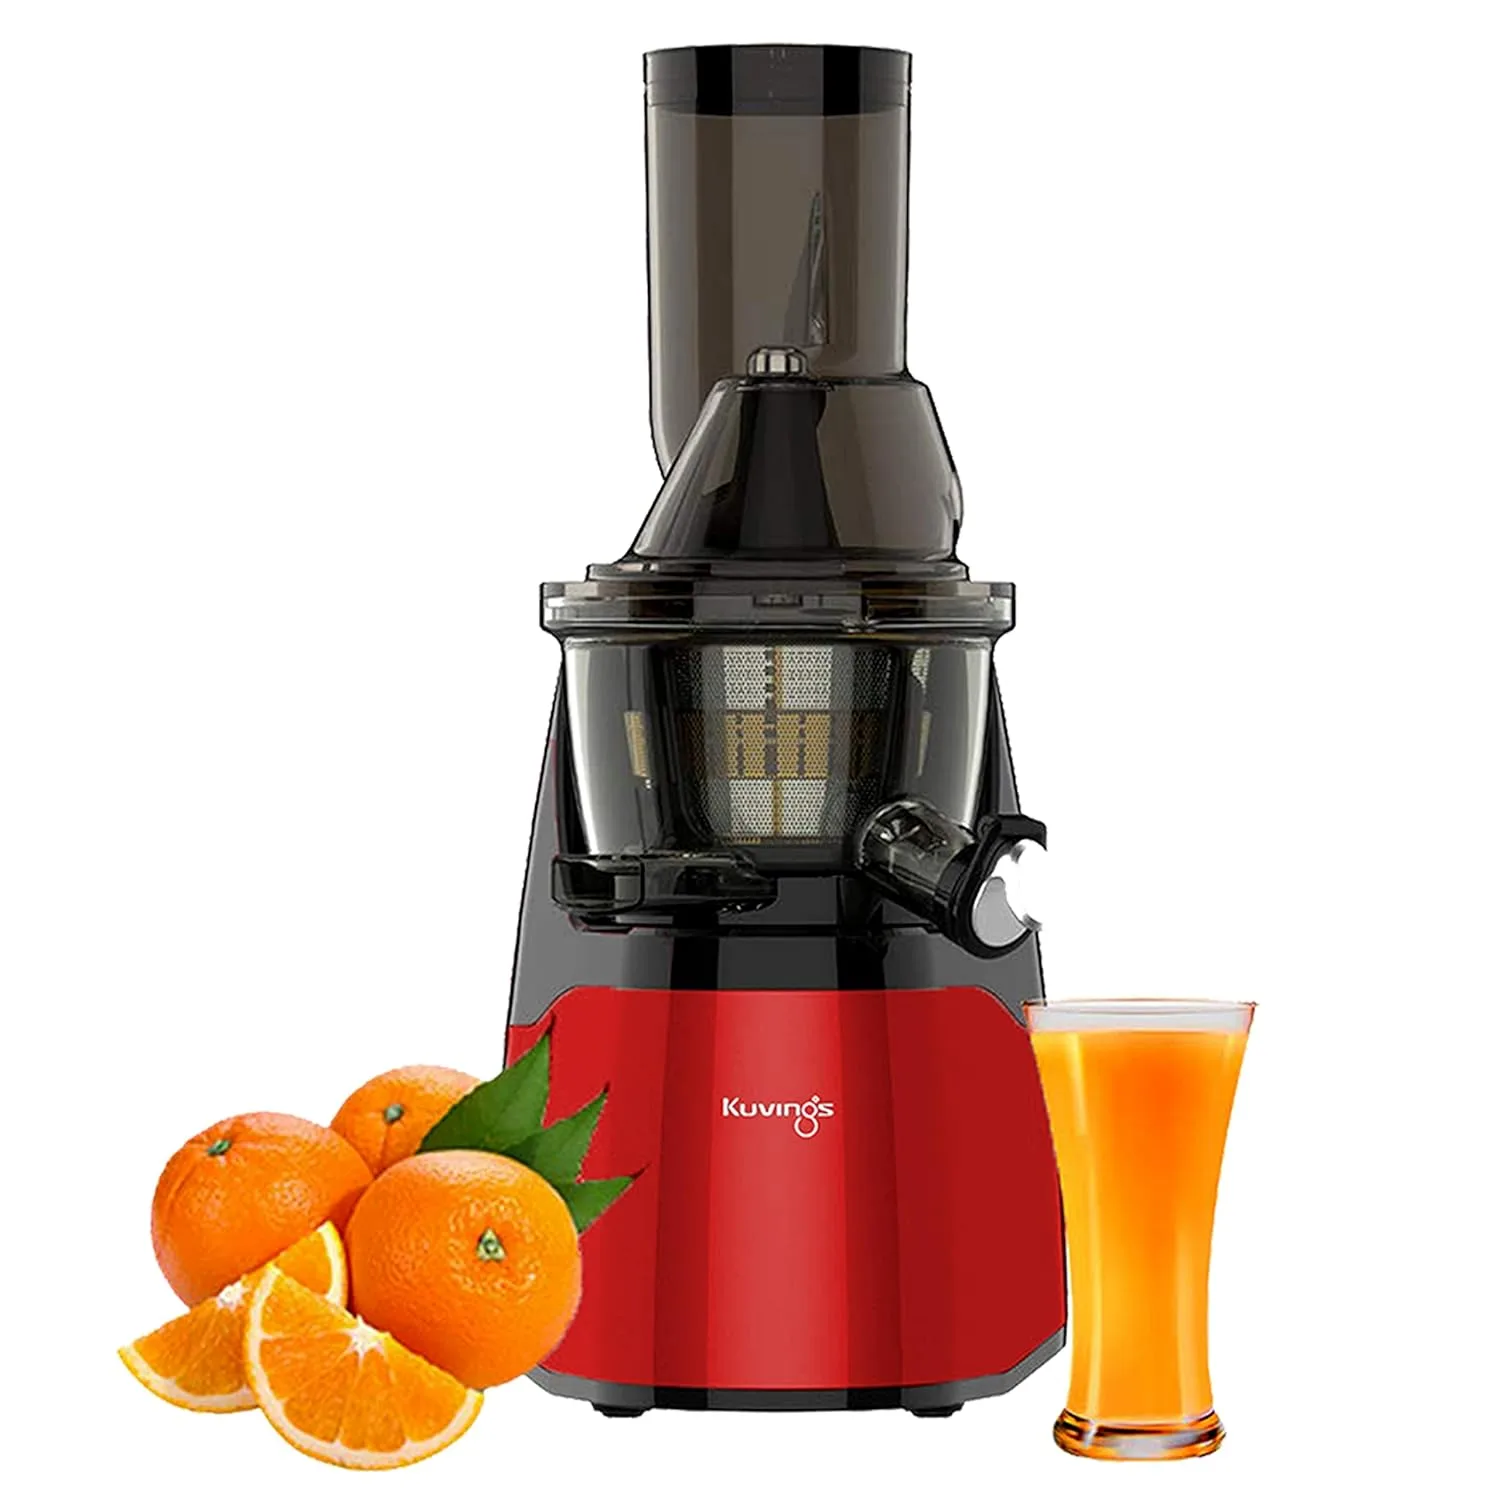 Kuvings EVO700 Red Professional Cold Press Whole Slow Juicer